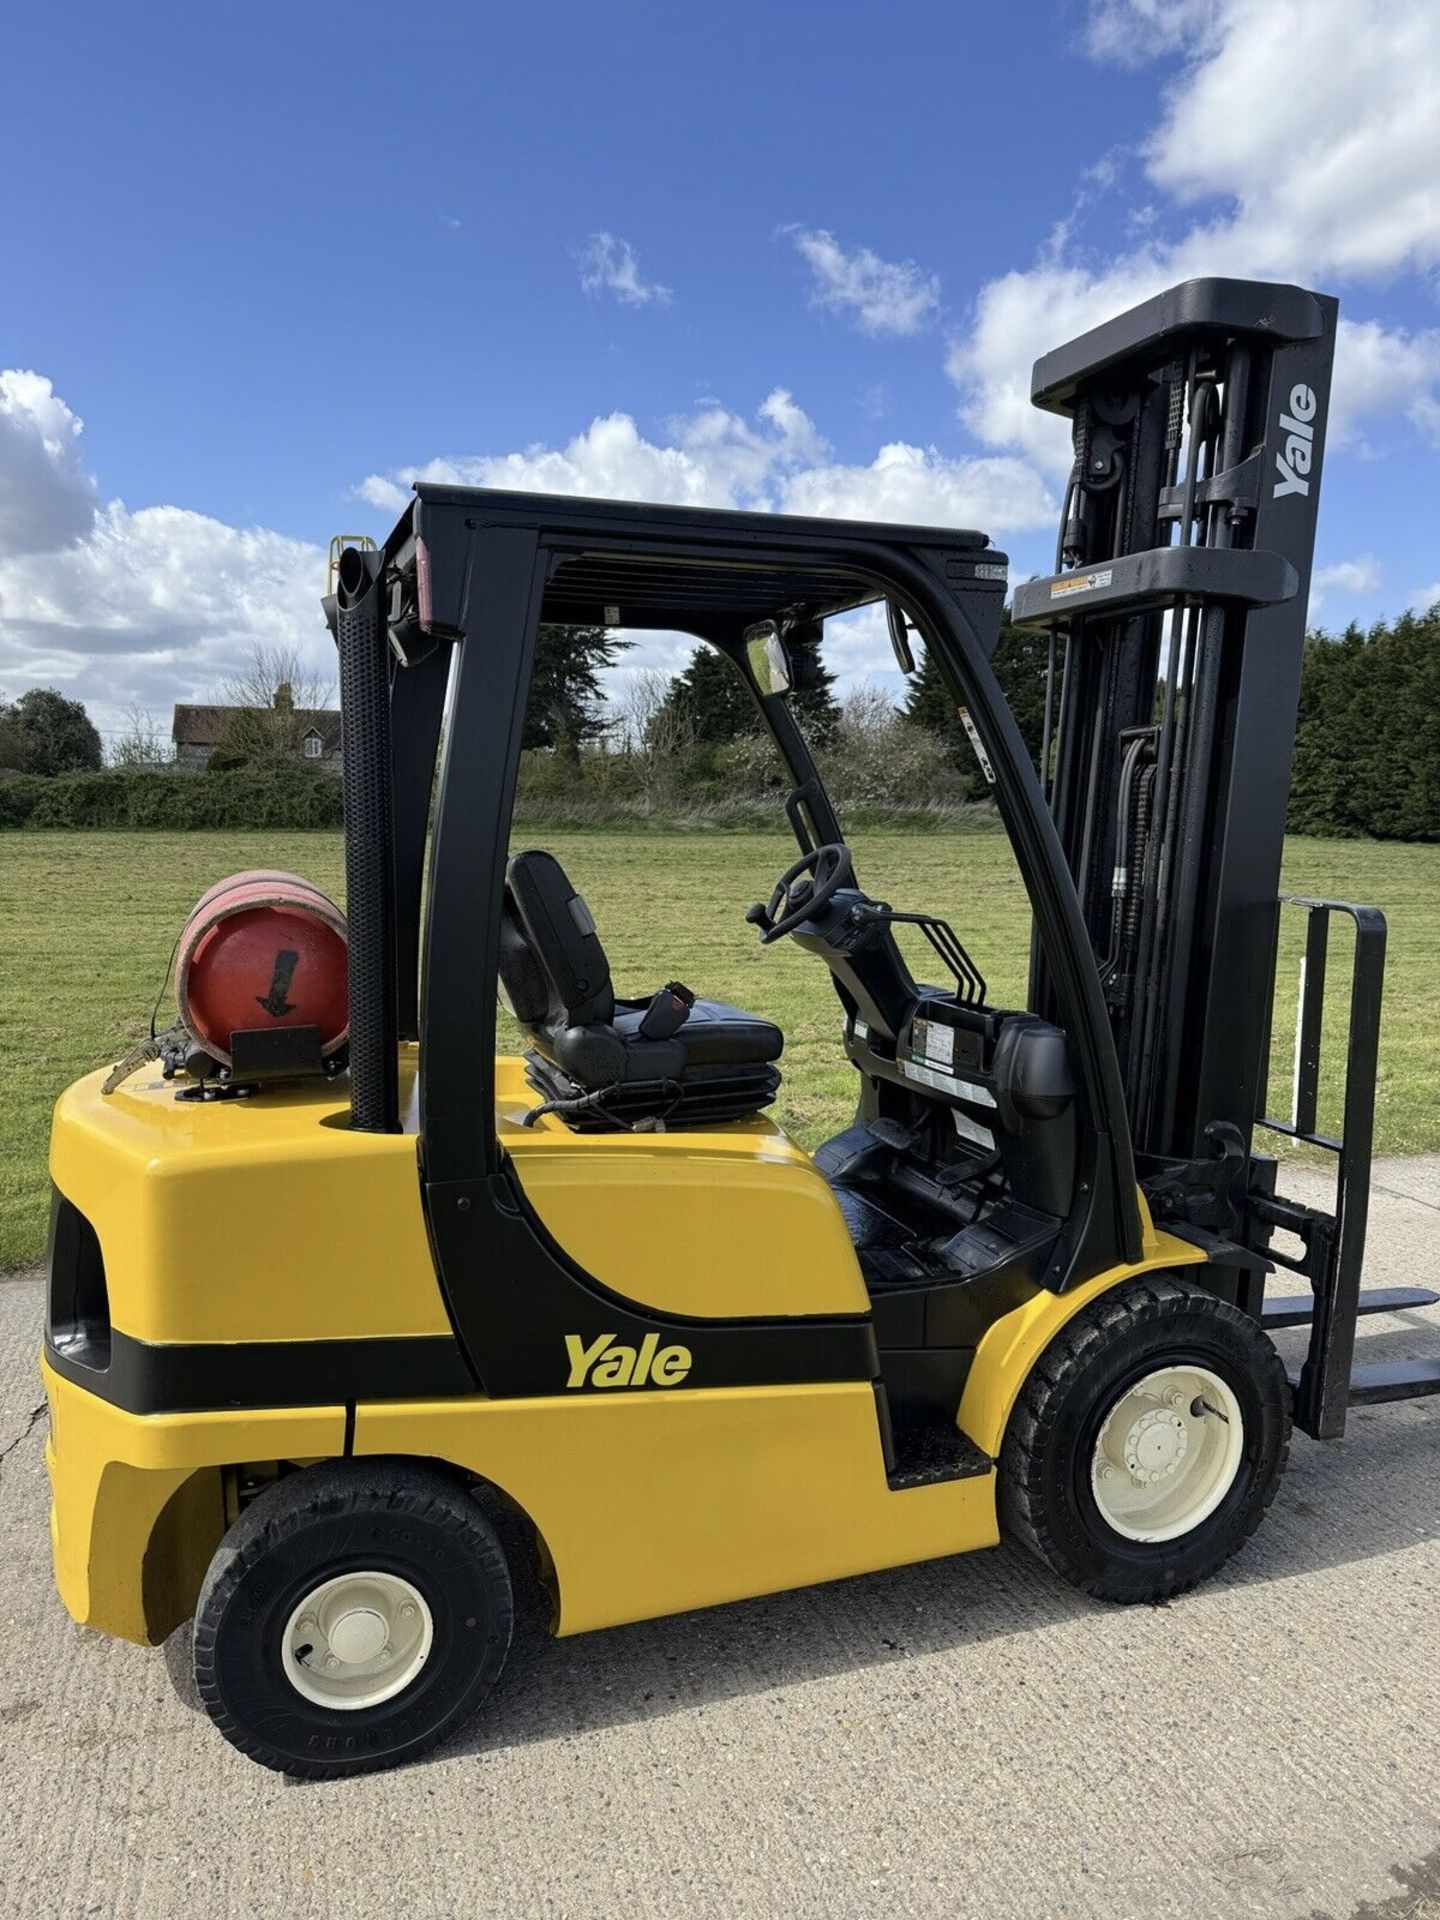 2017 - YALE Gas Forklift Truck (5.9 m lift) - Only 2200 Hours - Image 4 of 7